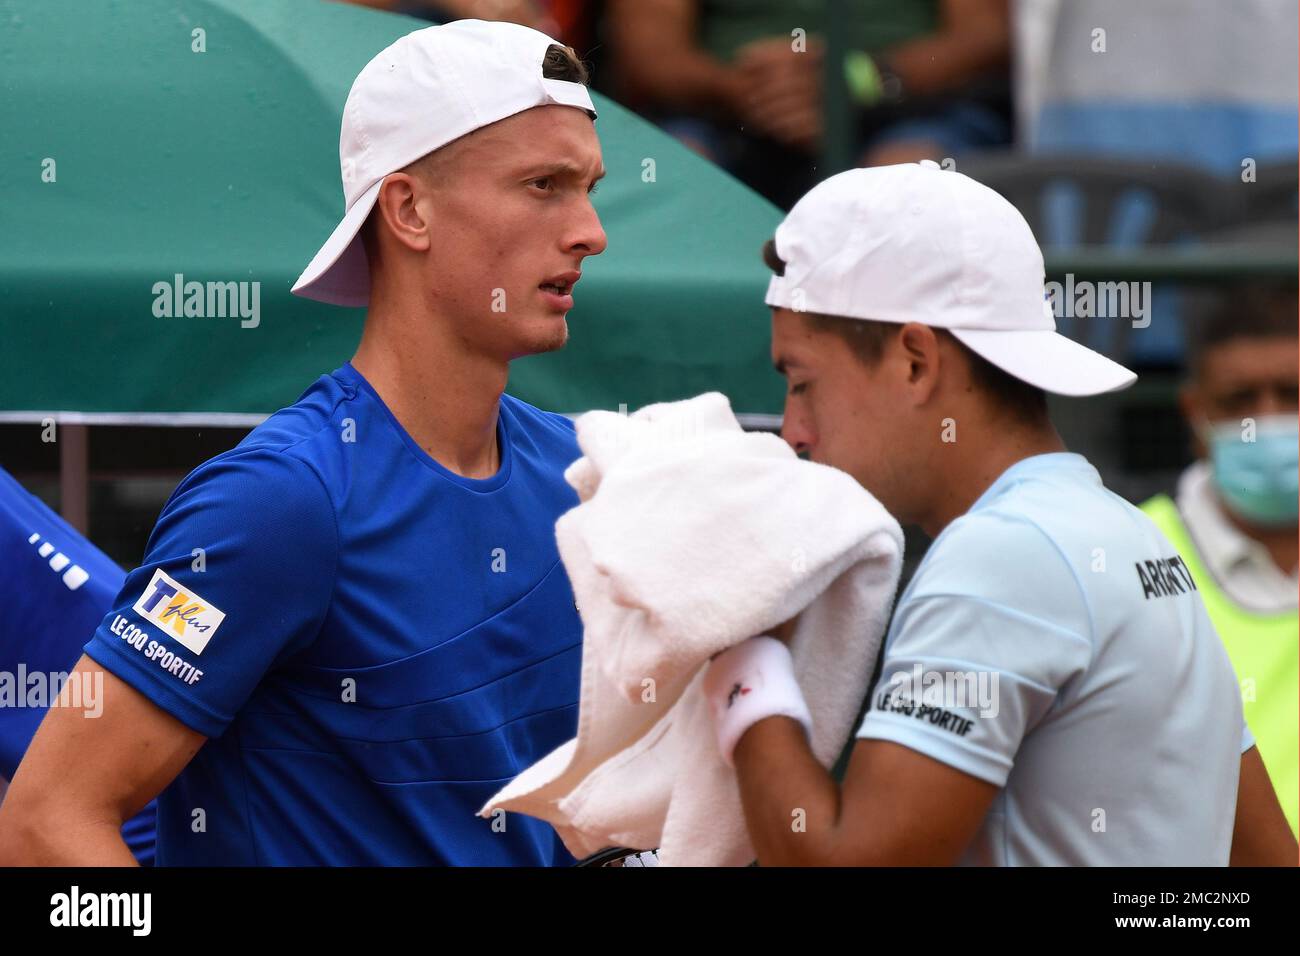 Czech Republic's Jiri Lehecka, left, and Argentina's Sebastian Baez switch  sides of the court during their Davis Cup first round tennis match in  Buenos Aires, Argentina, Friday, March 4, 2022. (AP Photo/Gustavo